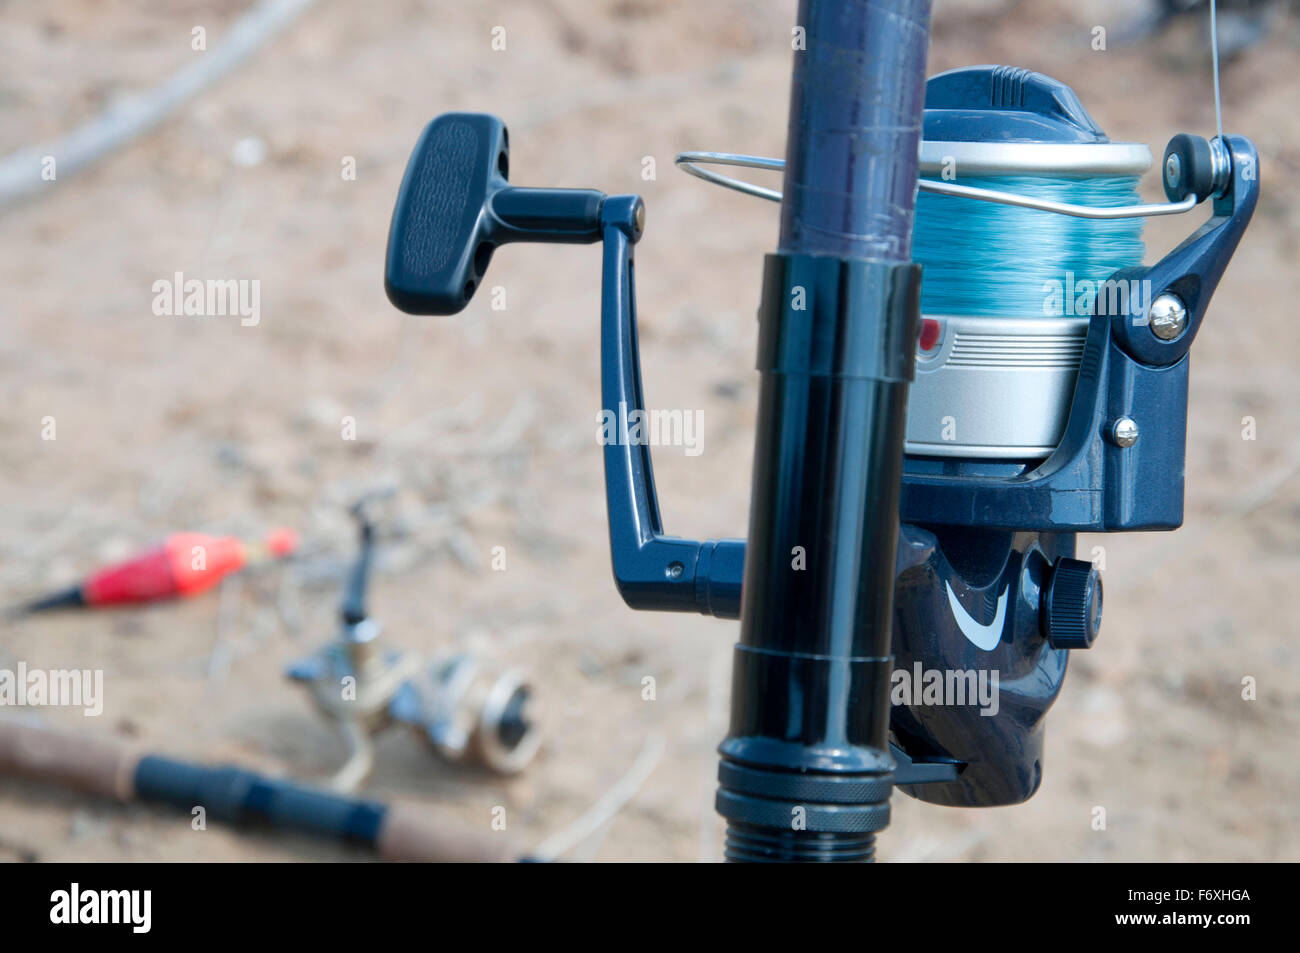 Reel with thread in a fishing rod Stock Photo - Alamy